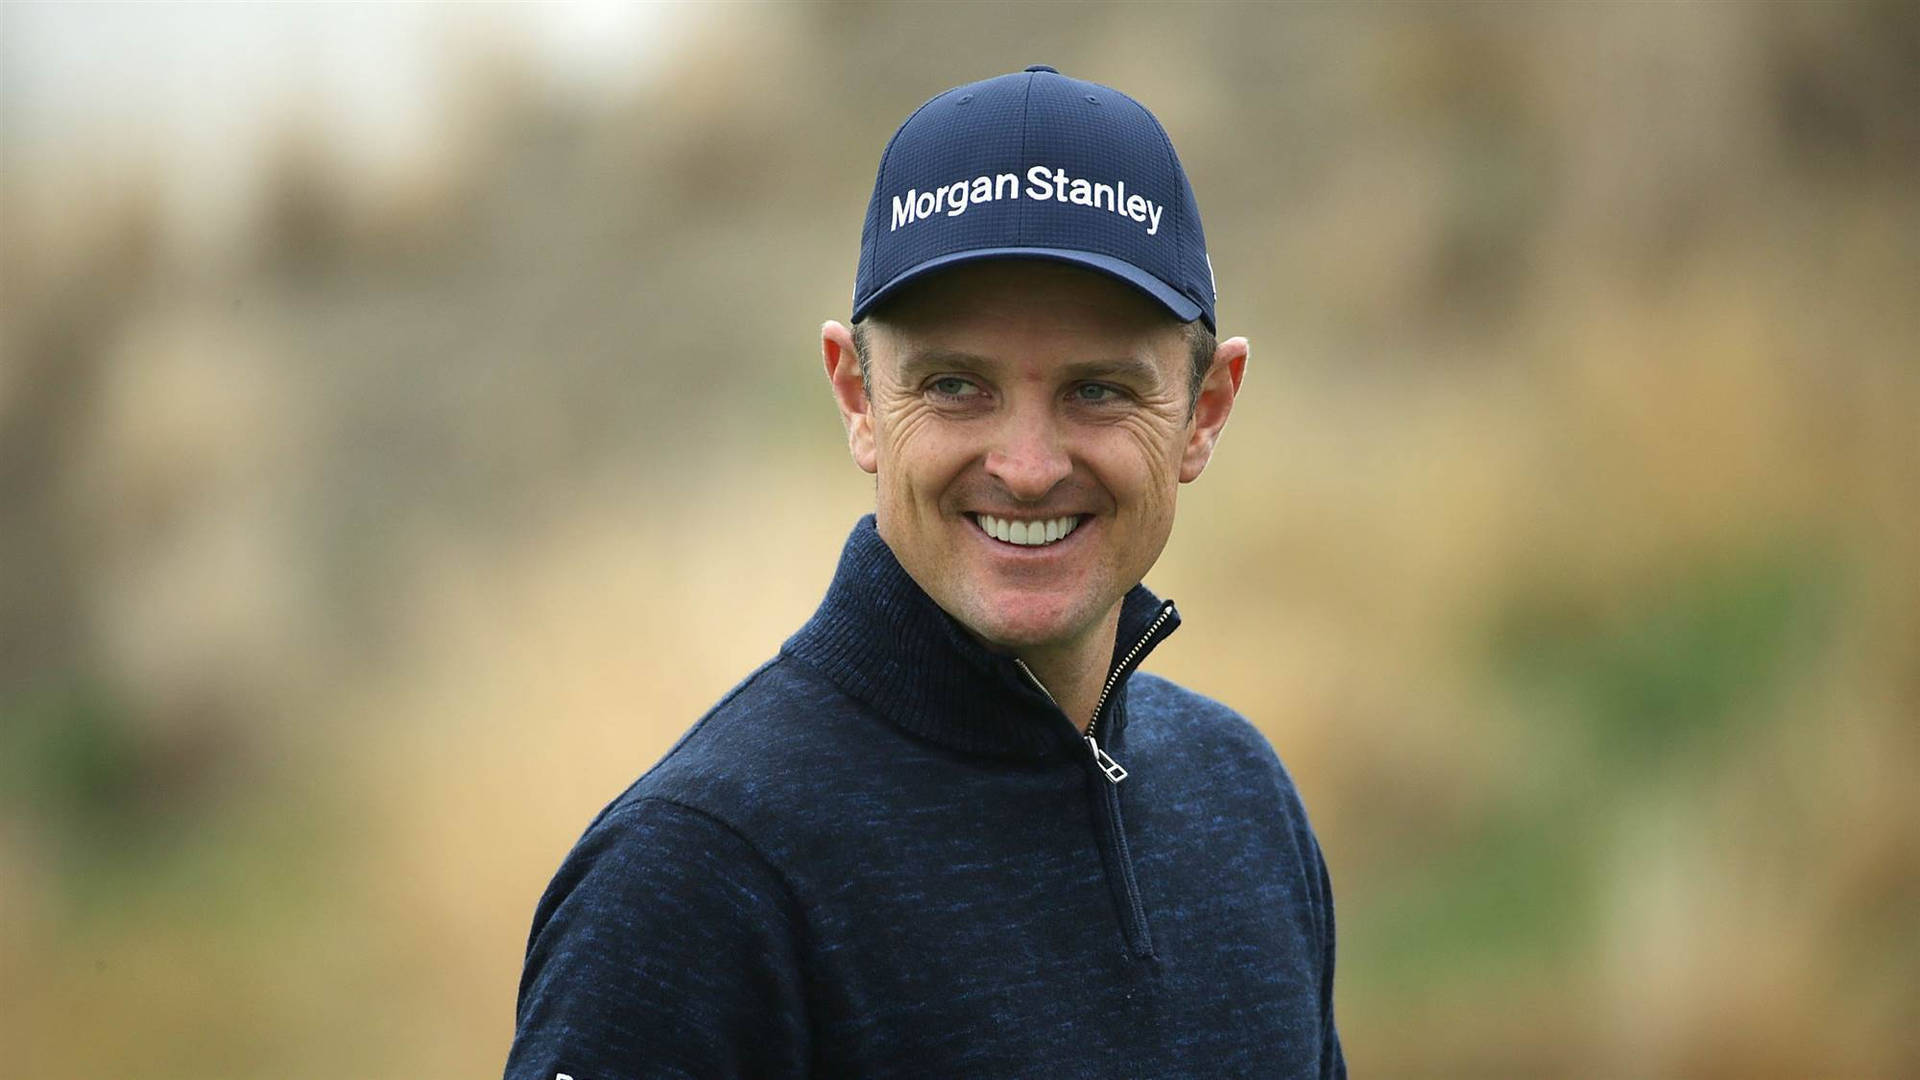 A Cheerful Justin Rose On The Golf Course Wallpaper